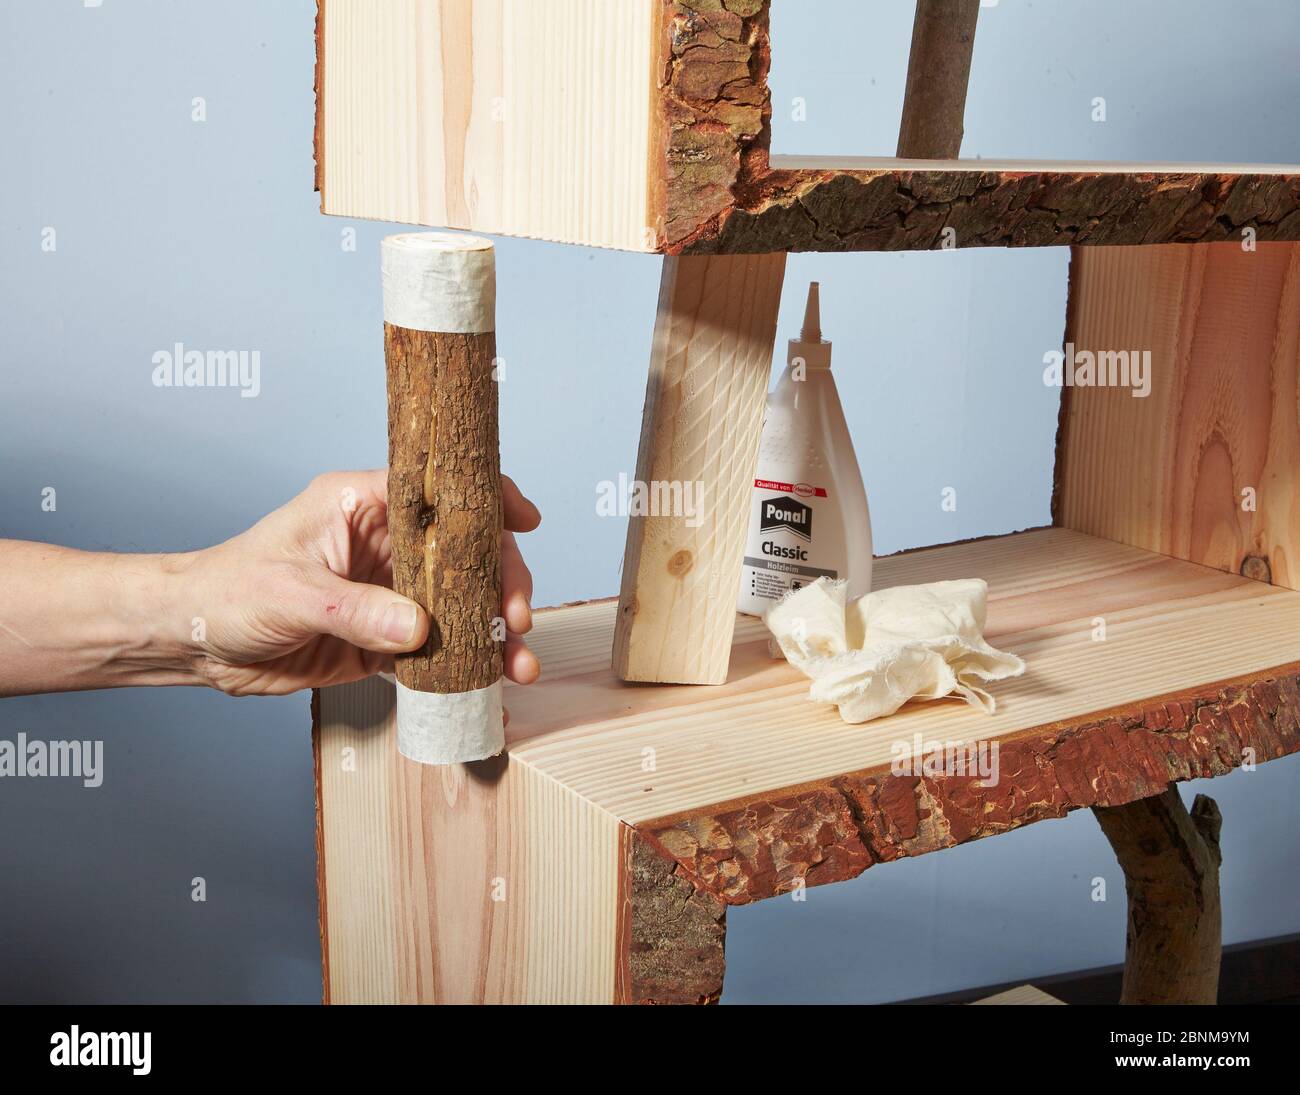 Construction of a shelf made of wood, do-it-yourself production, step-by-step, step 11 attaching the branch as a support, using auxiliary blocks and glue Stock Photo